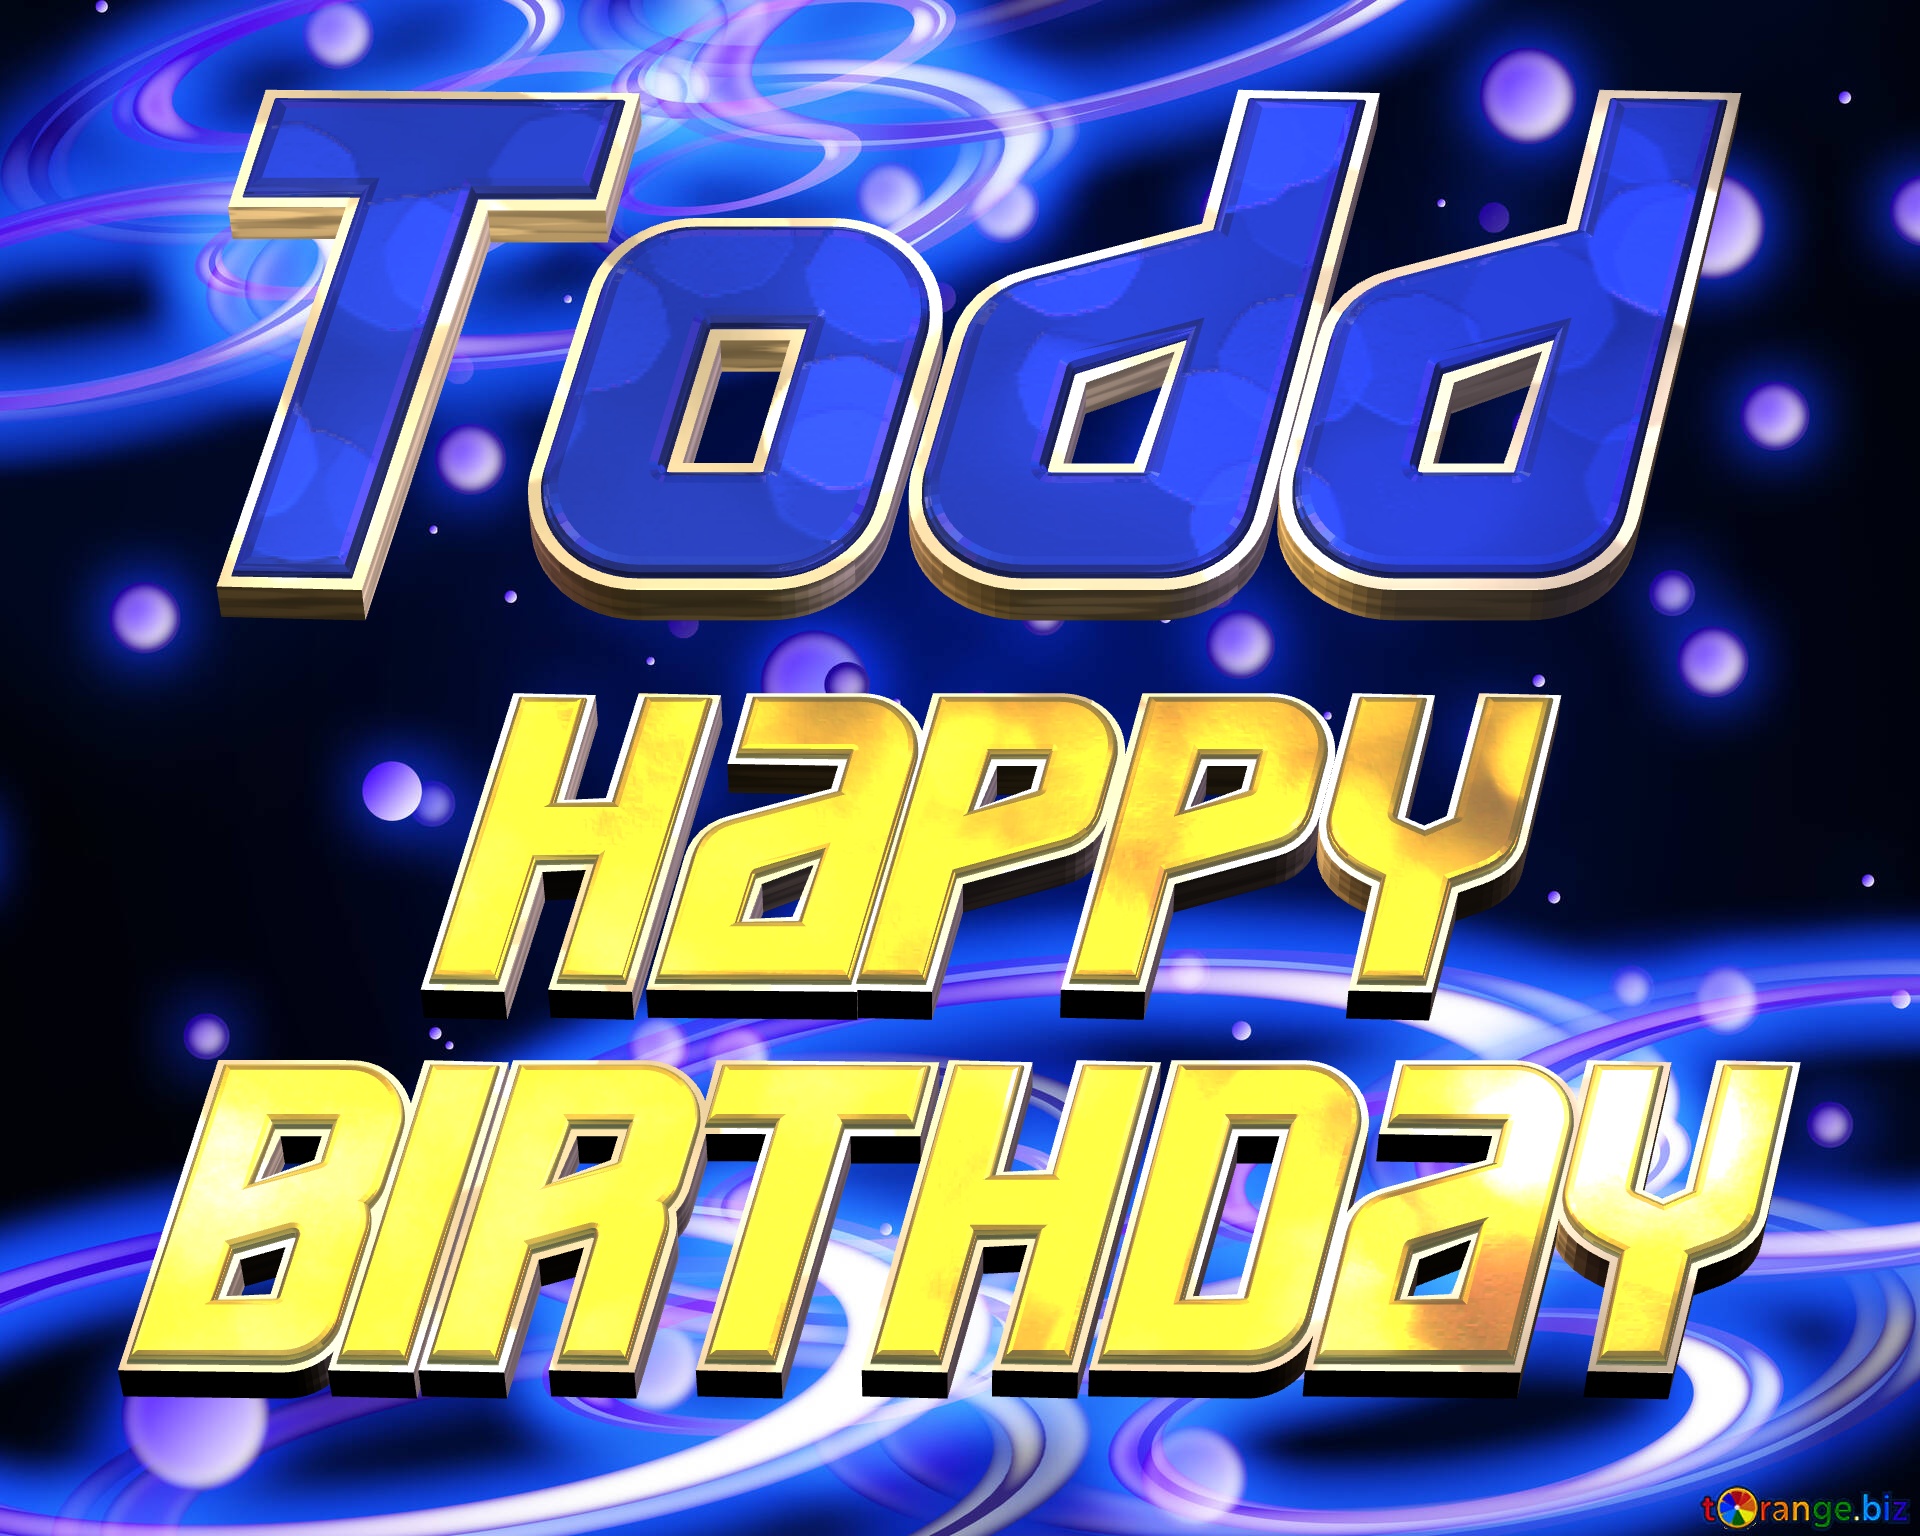 Todd Space Happy Birthday! Technology background №54919